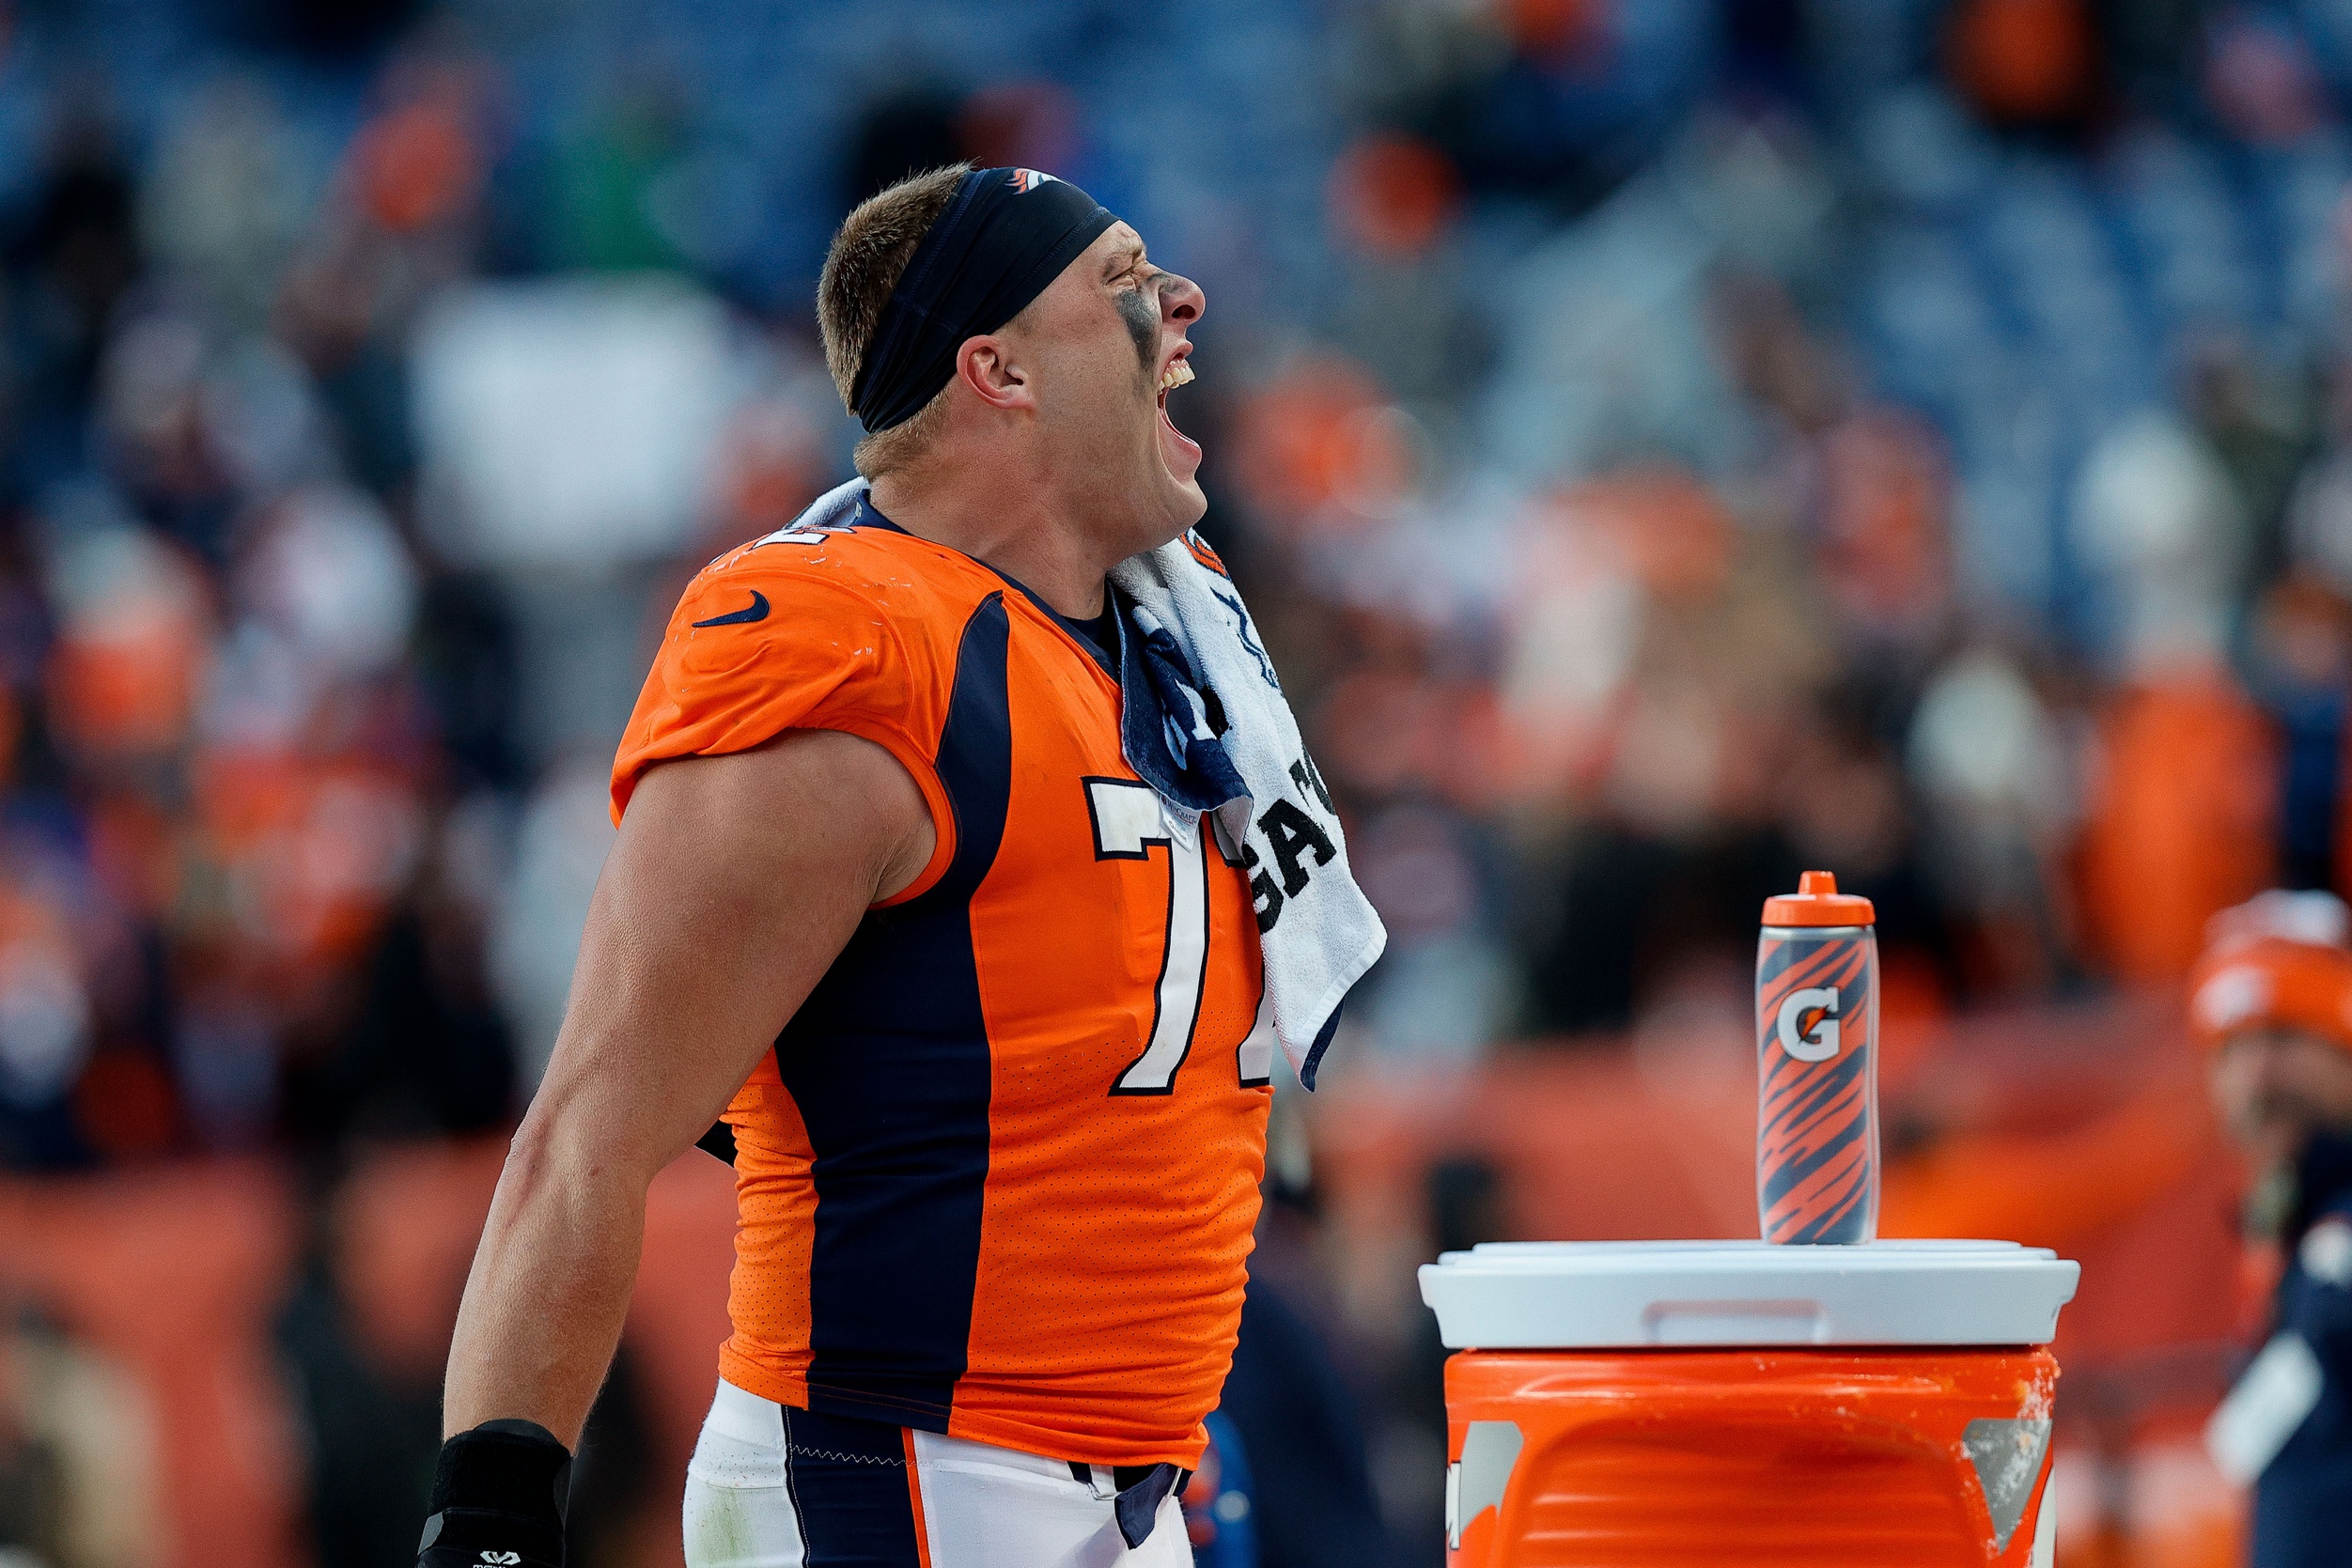 Denver Broncos offensive tackle Garett Bolles (72) reacts after the game against the Kansas City Chiefs at Empower Field at Mile High.